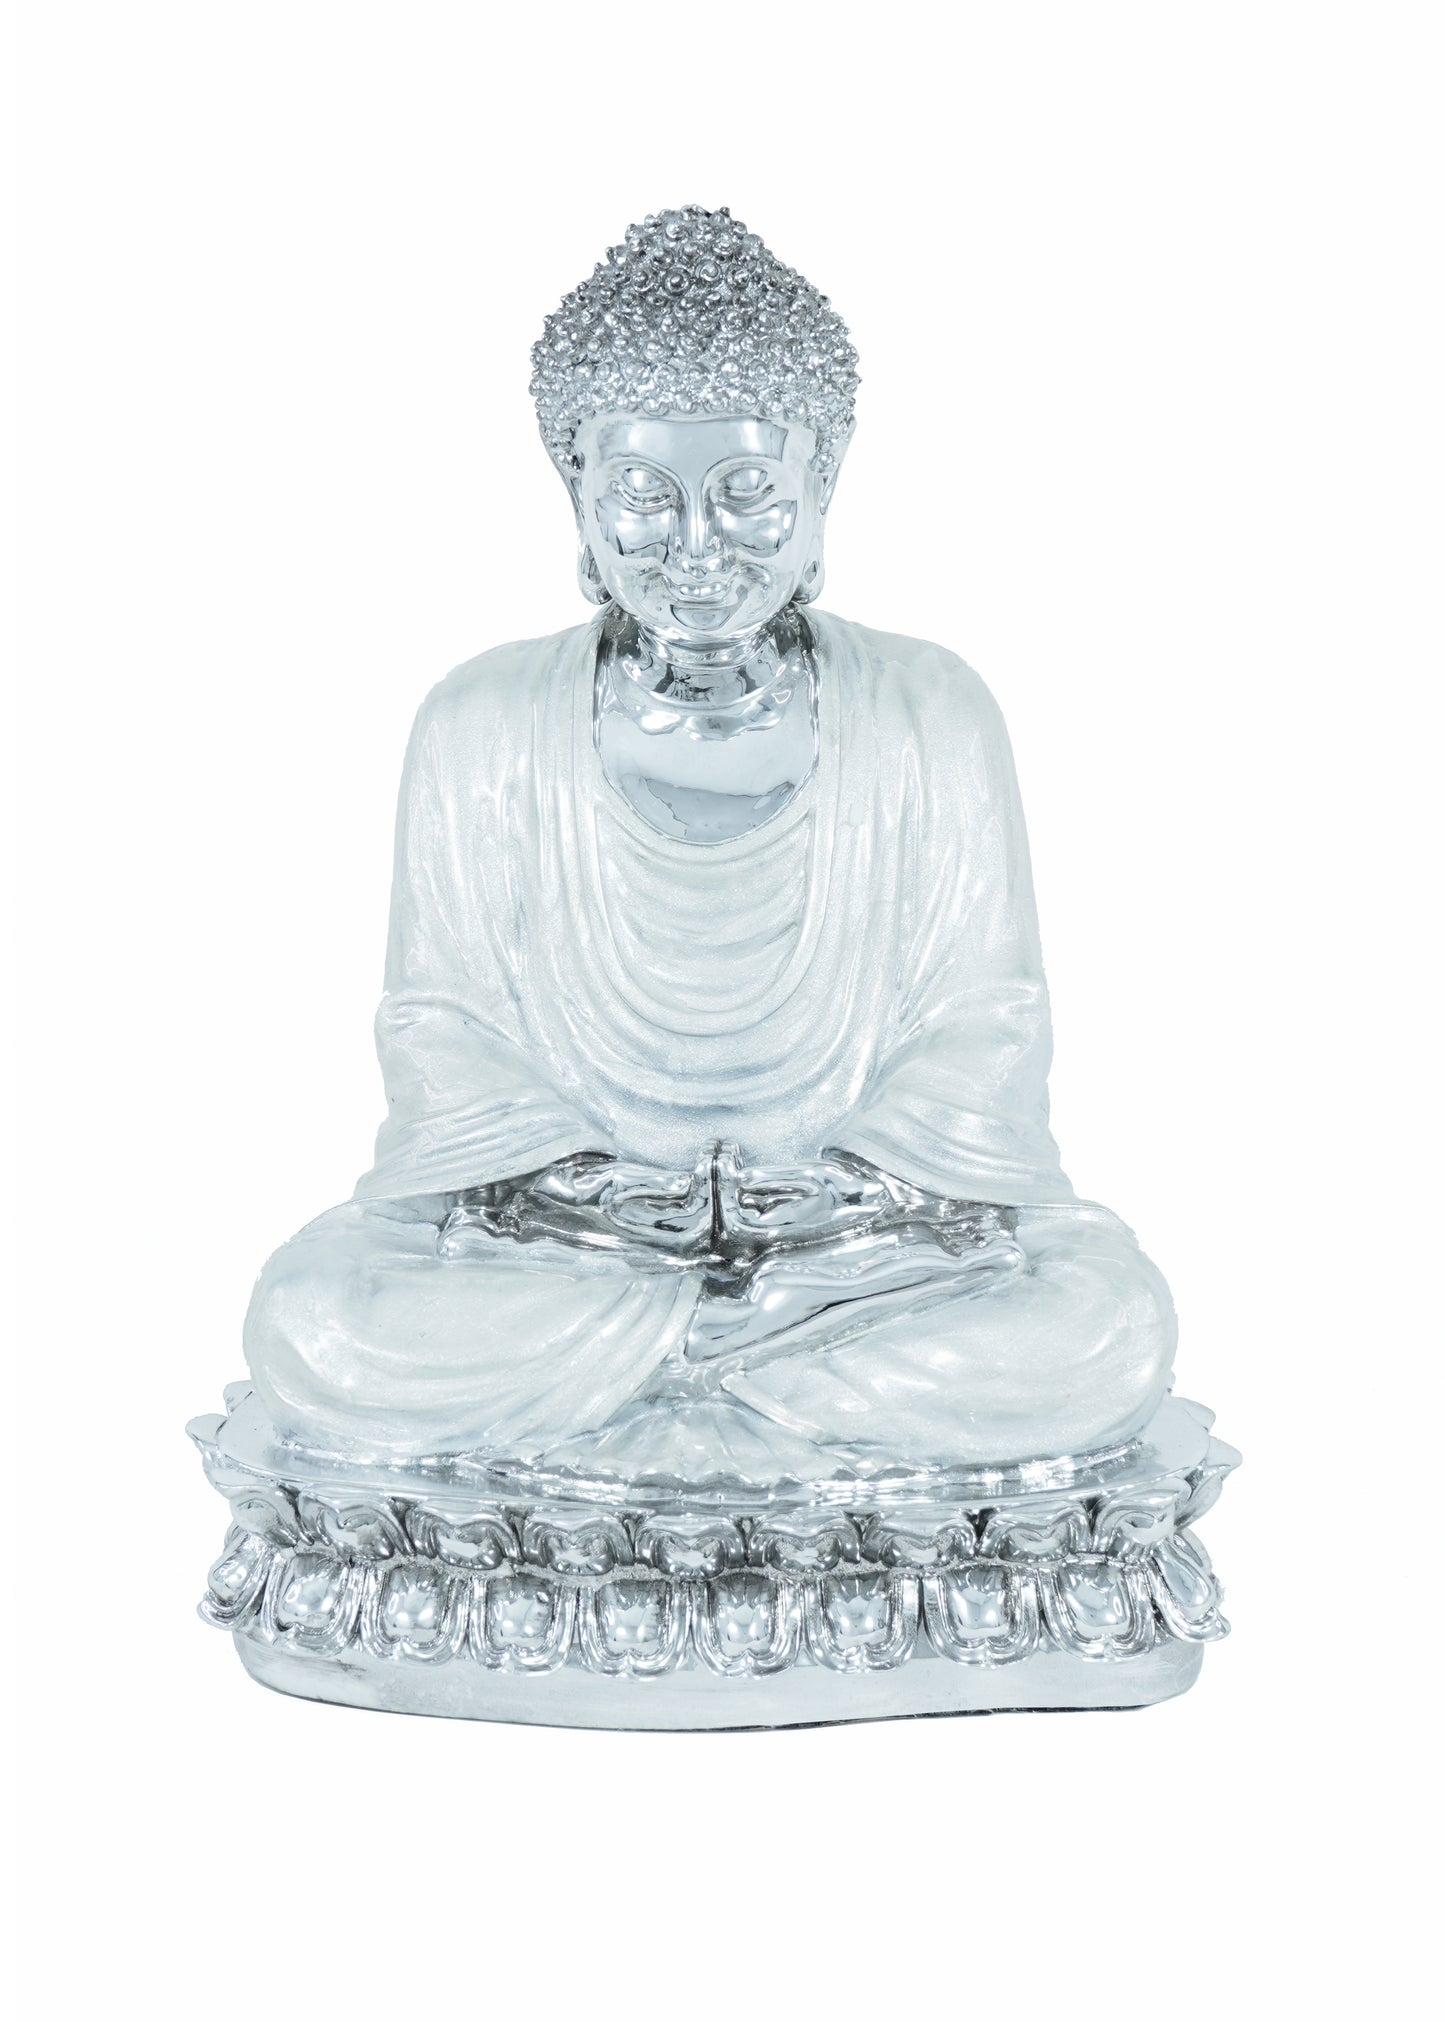 Sitting Tabletop Silver/White Buddha Sculpture - Expo Home Decor